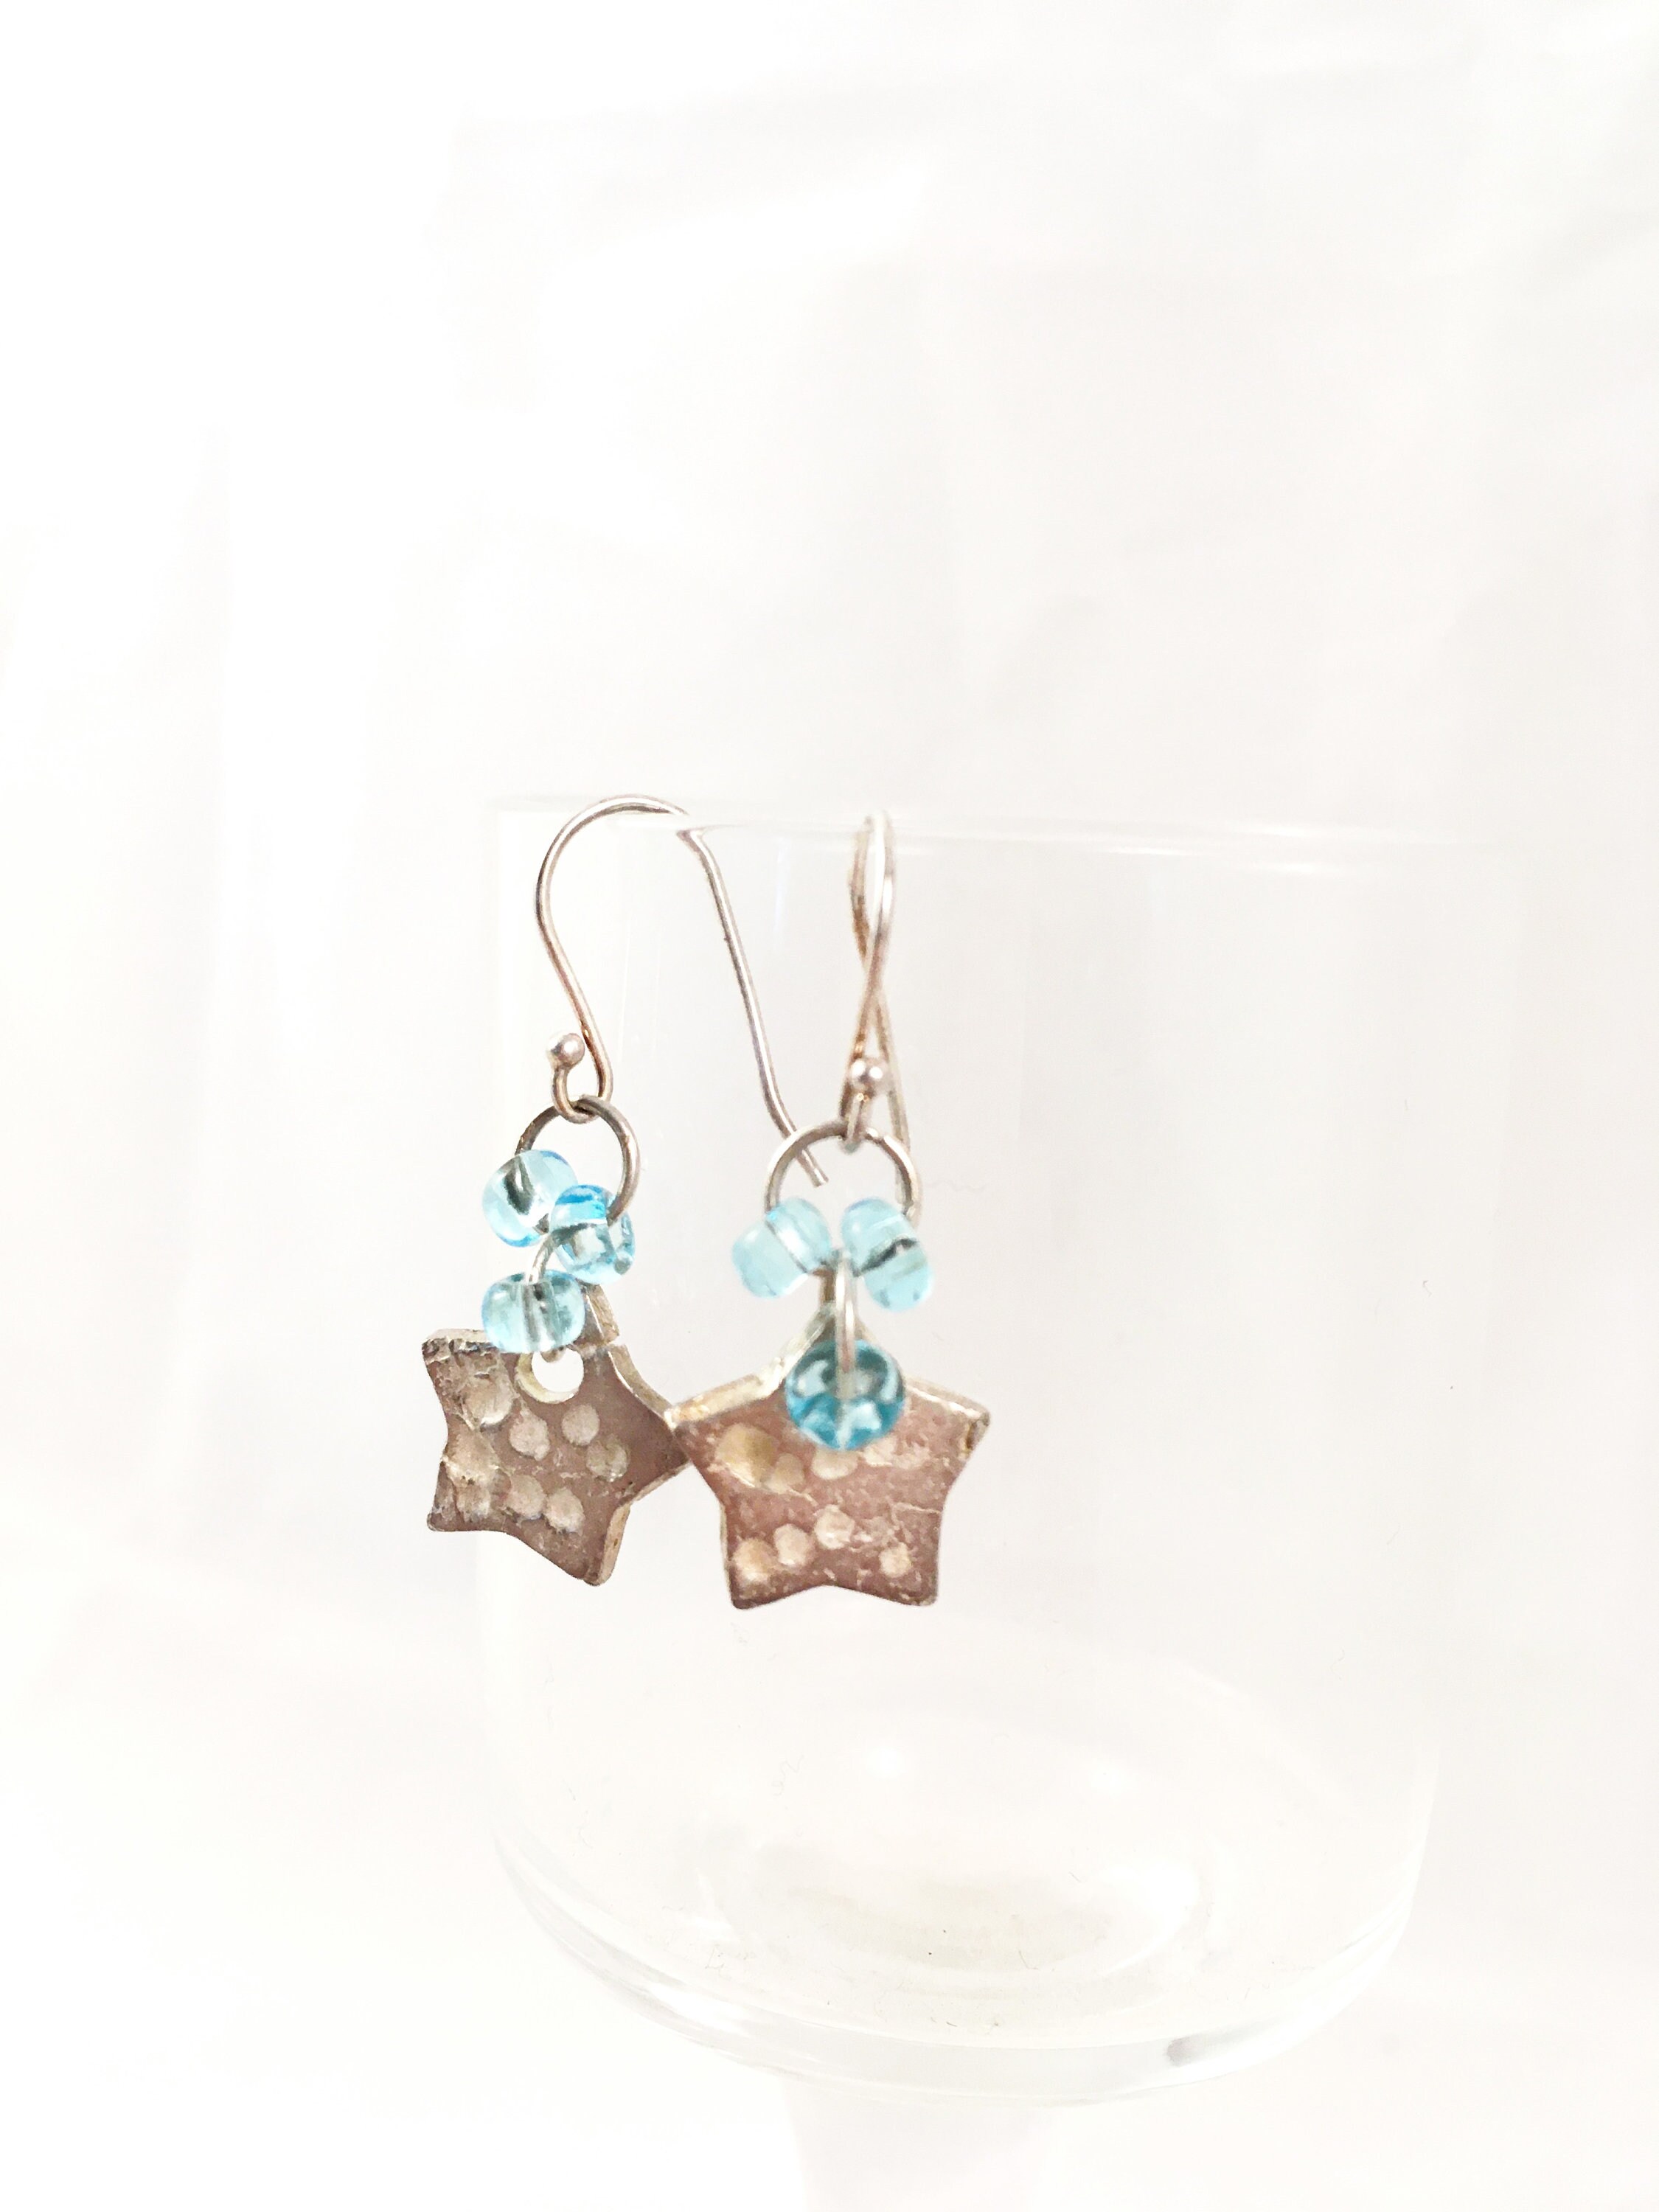 Earrings Blue Accent Dot Texture Fine Silver Star